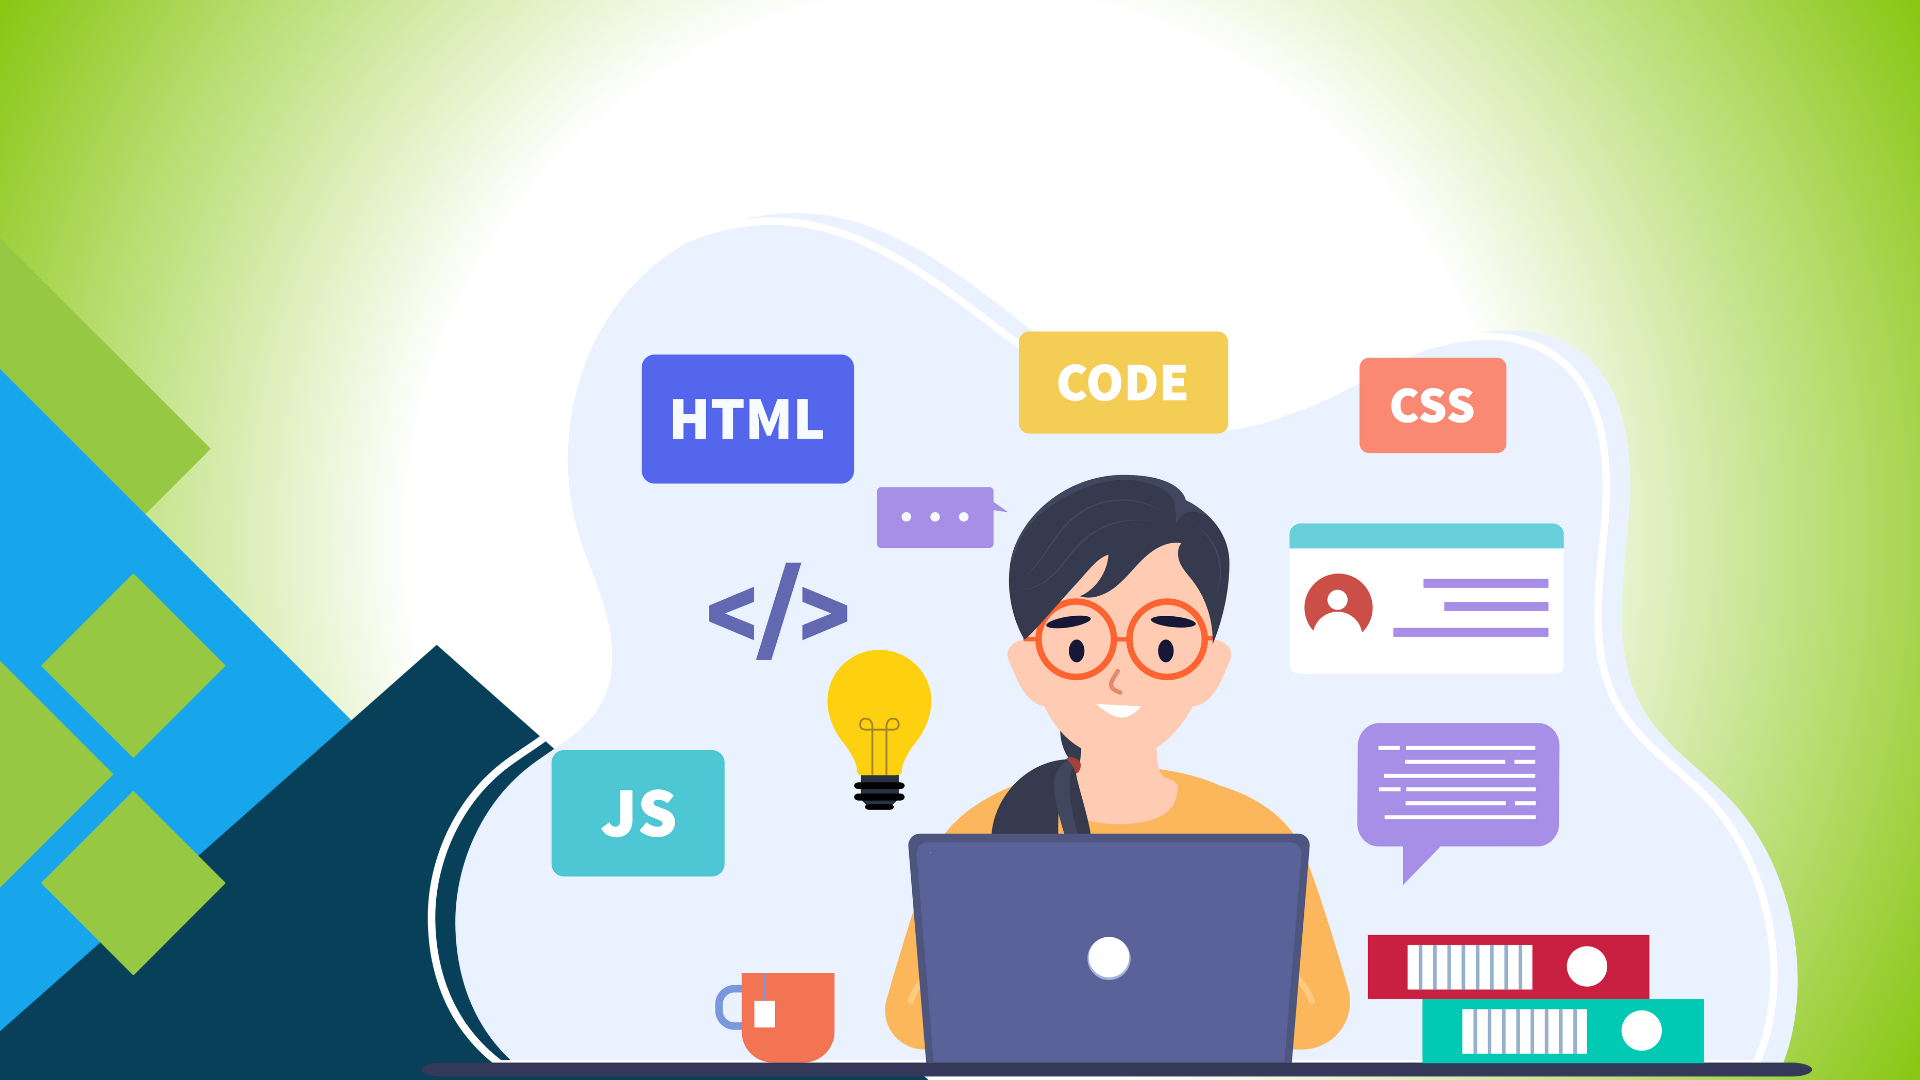 A lady developer is creating web application using single page applications JavaScript libraries code execution with different JavaScript frameworks